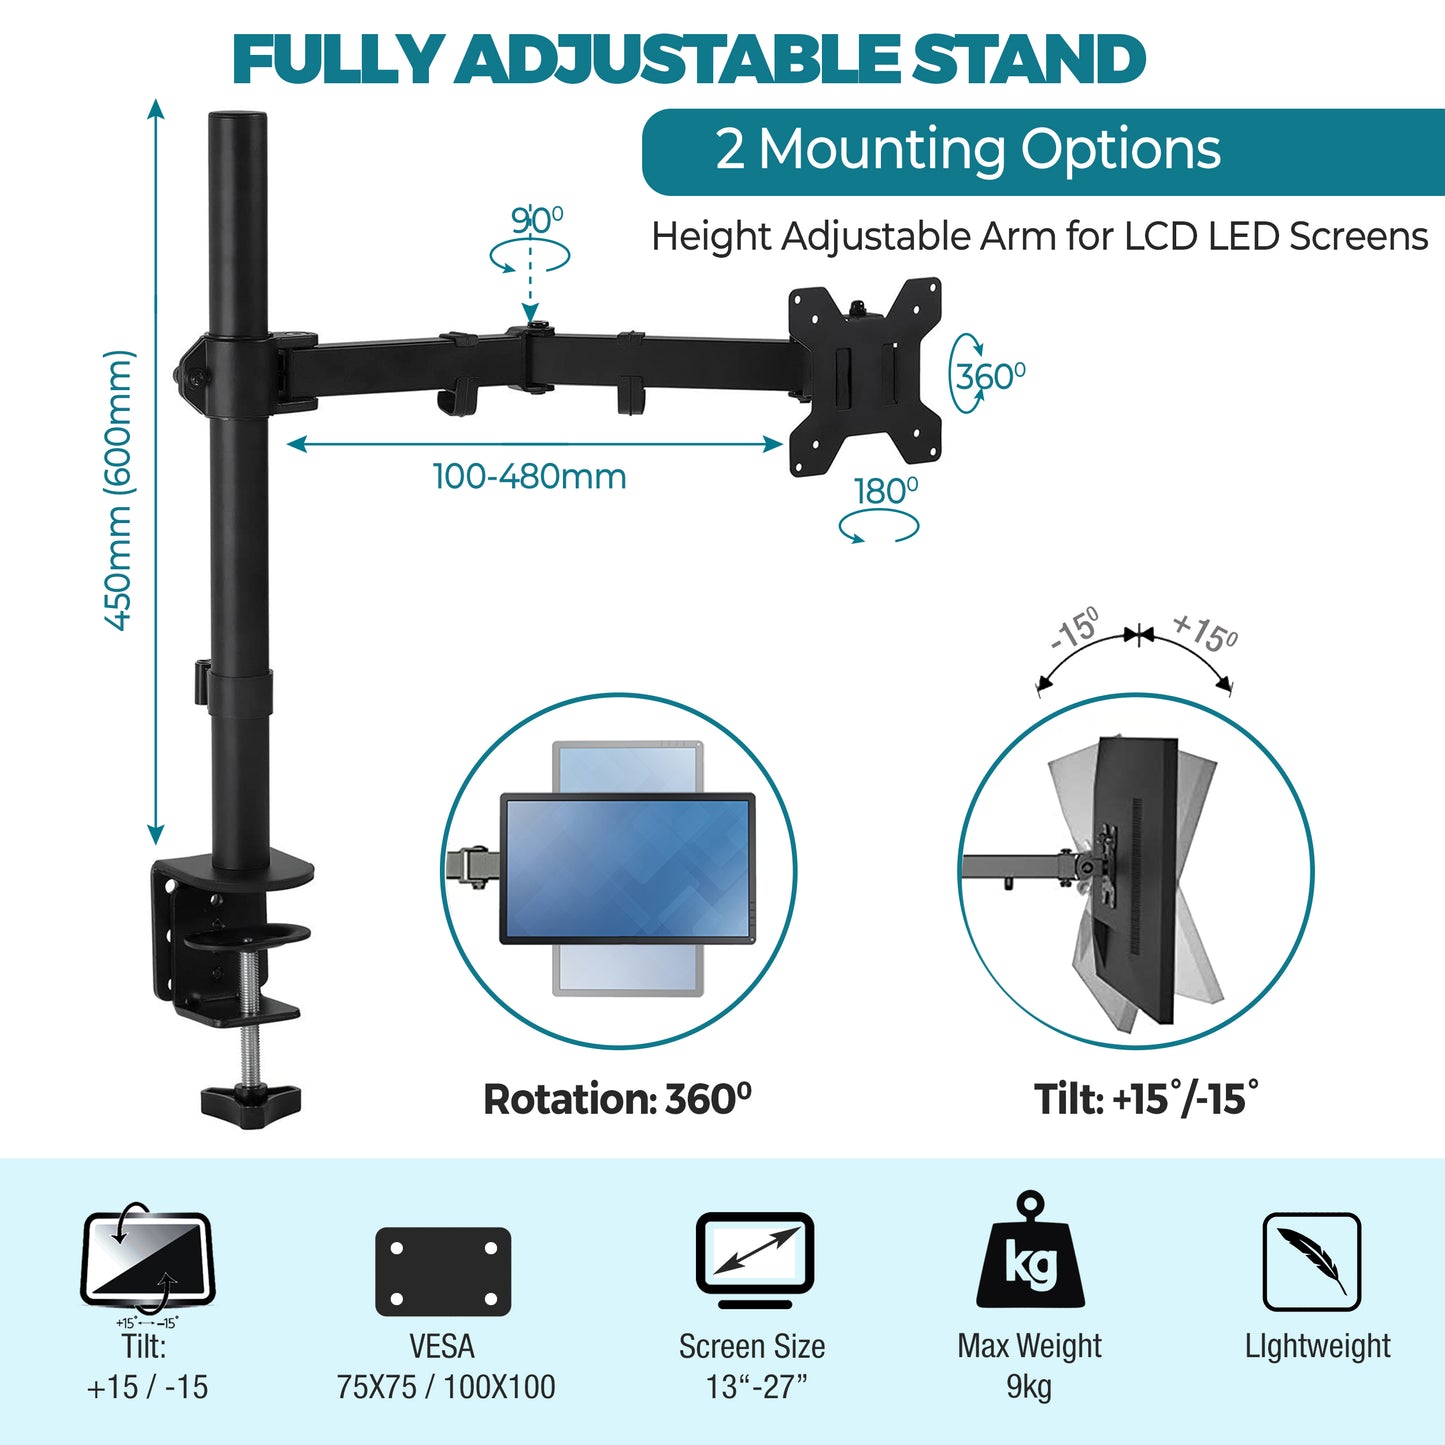 PALMAT 13-27” Single Monitor Mount, Height Adjustable Arm for LCD LED Screens, 2 Mounting Options, VESA Dimensions 75/100 Weight up to 9kg with Desk Clamp